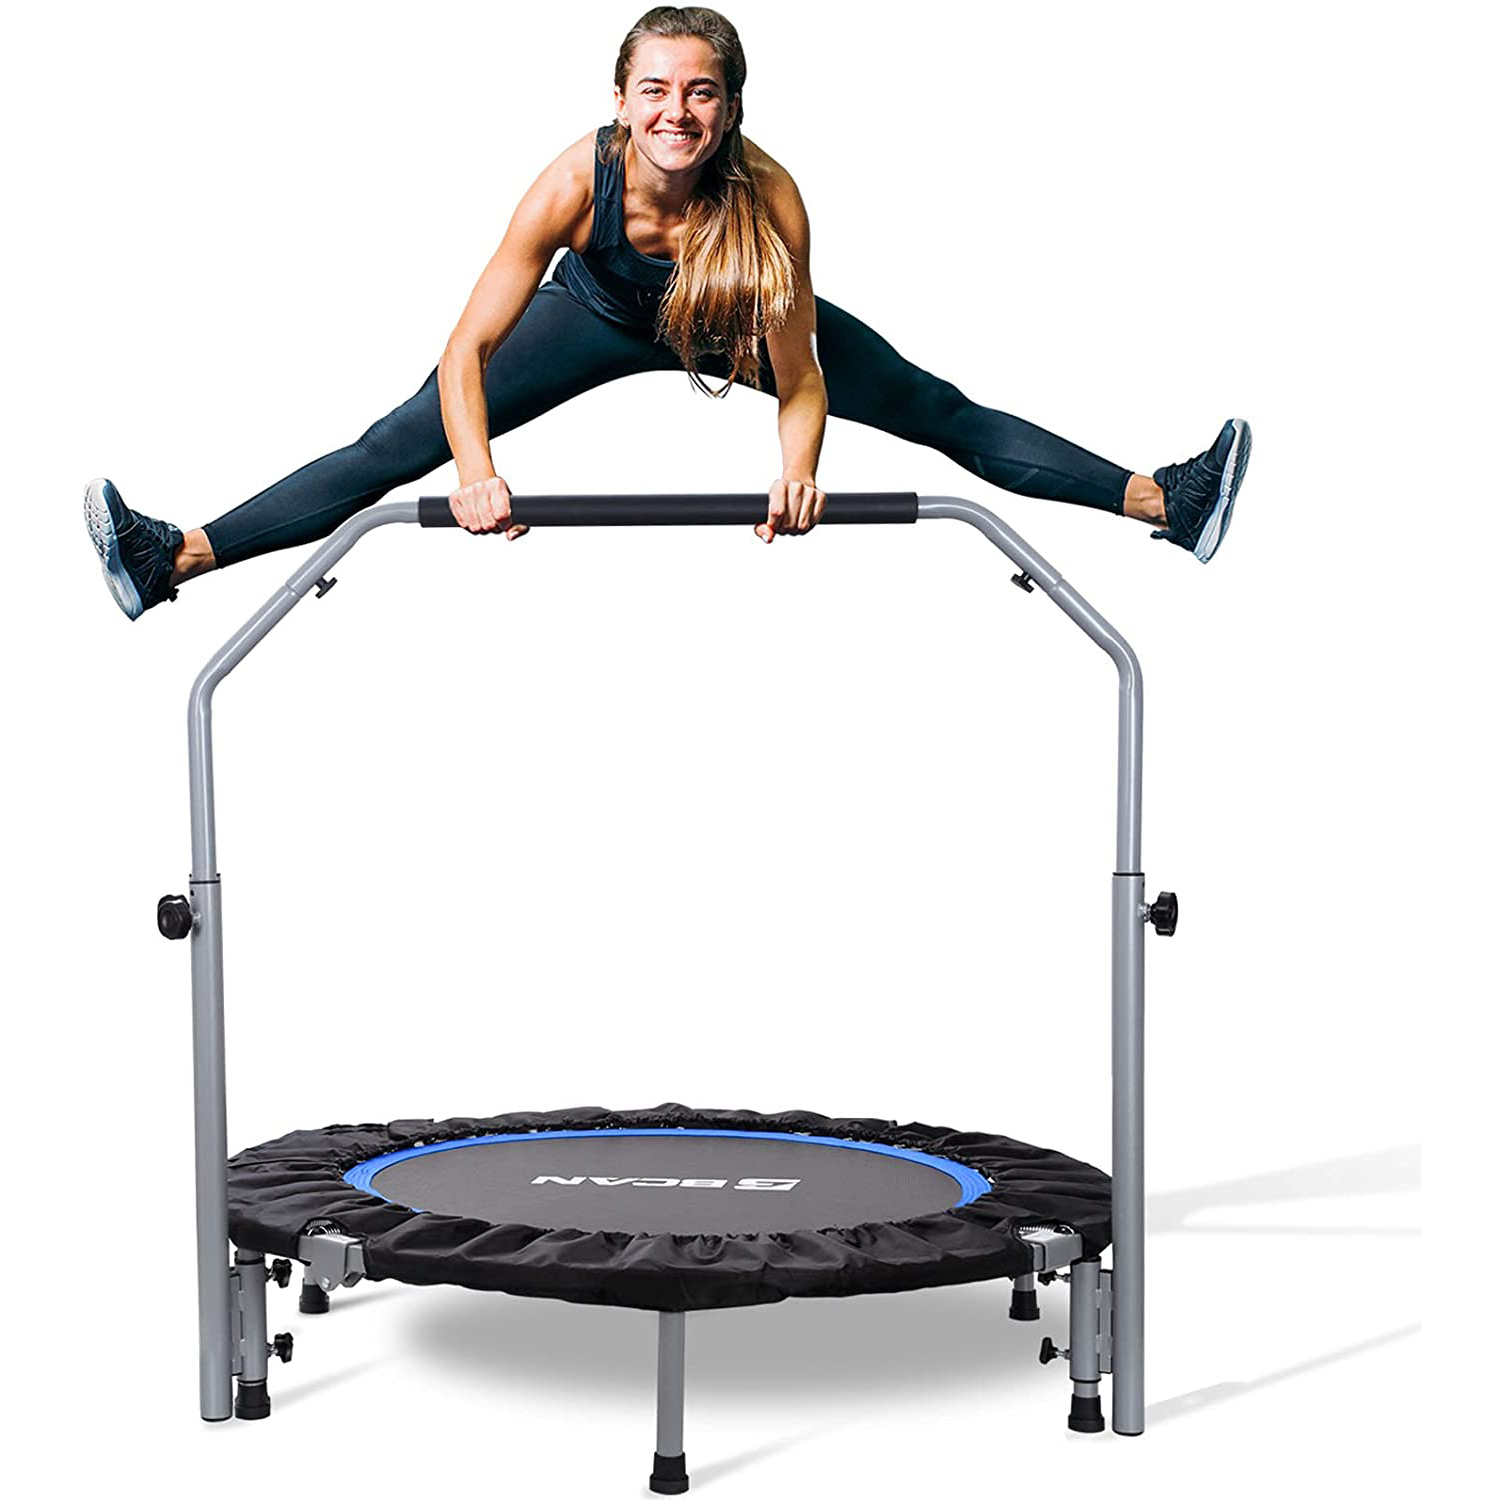 Gielmiy 40 Mini Trampoline,Silent Fitness Trampoline，Indoor Small Bungee Rebounder Cardio Trainer Workout for Adults（Max Load 330lbs） 